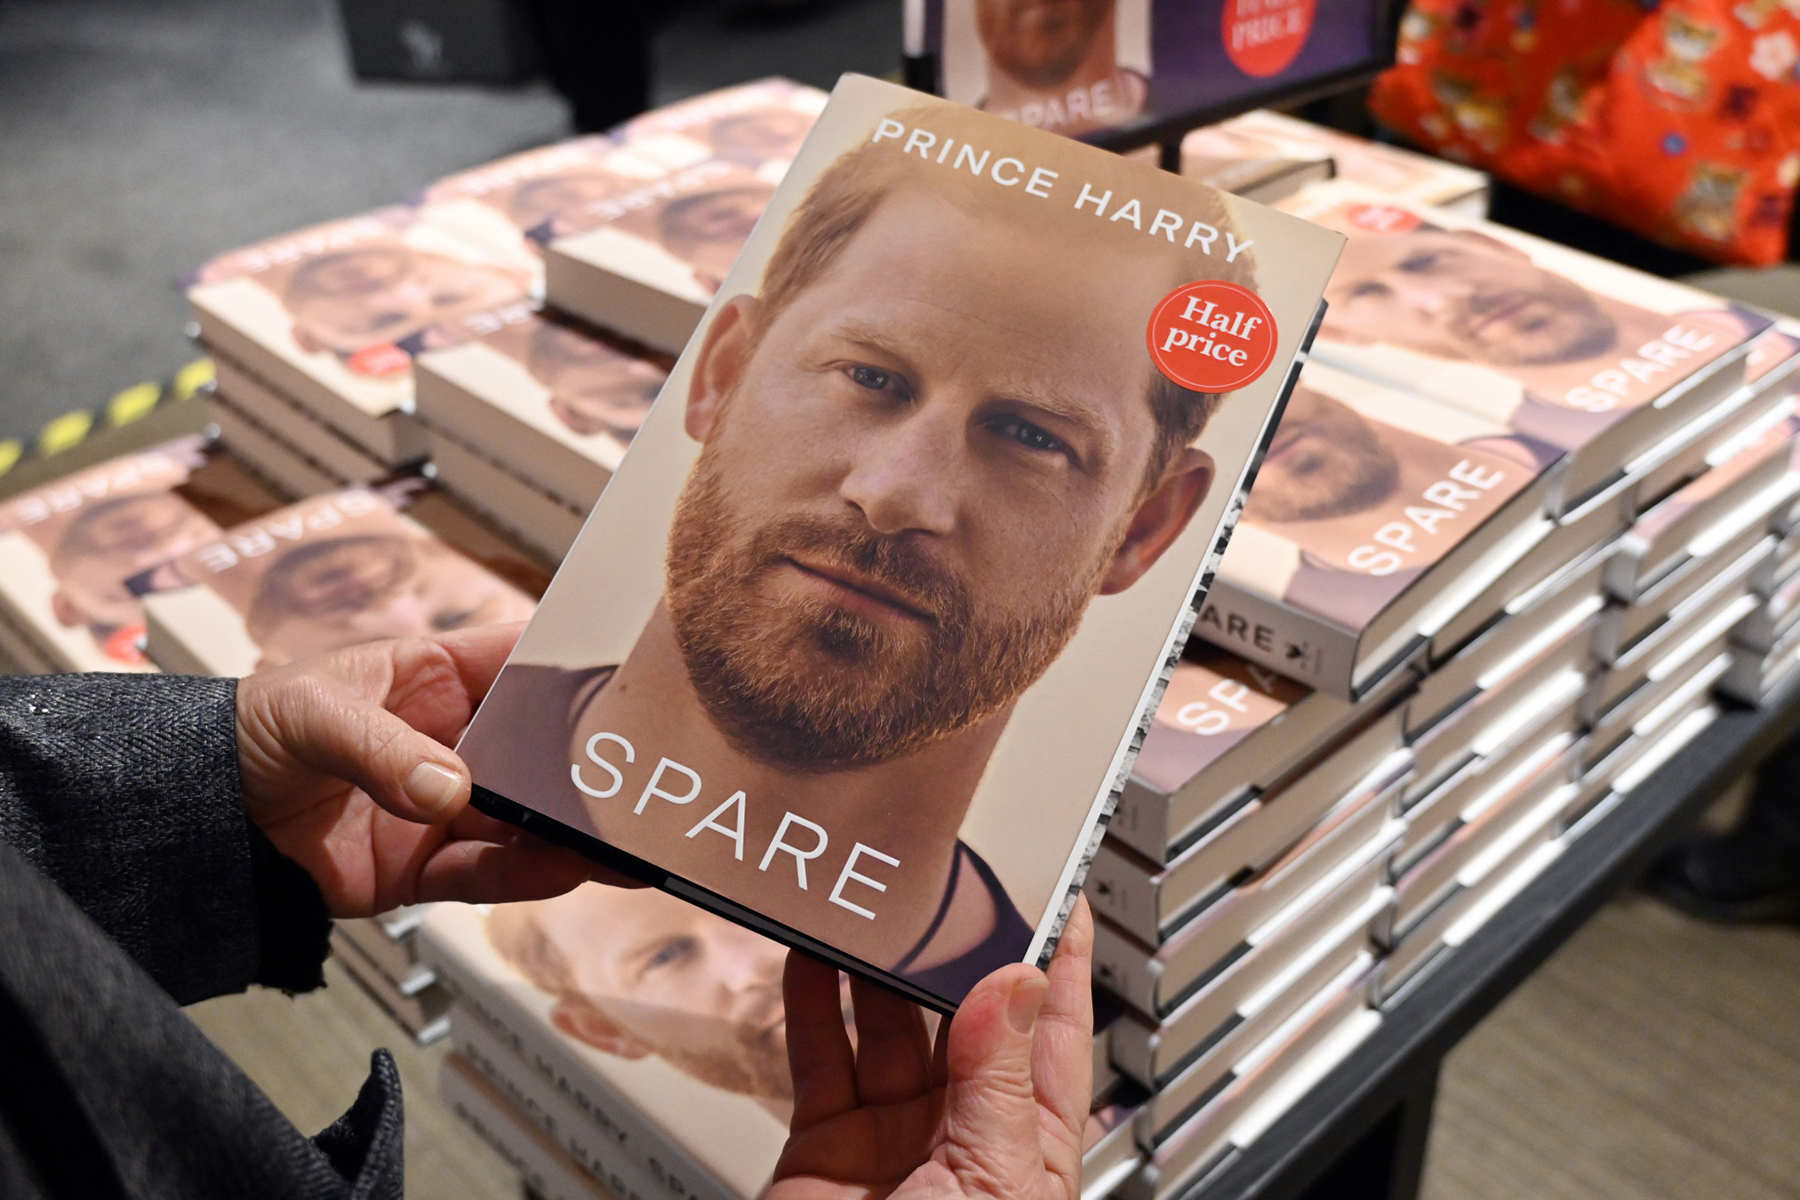 "Prince Harry : spare " / Gtres